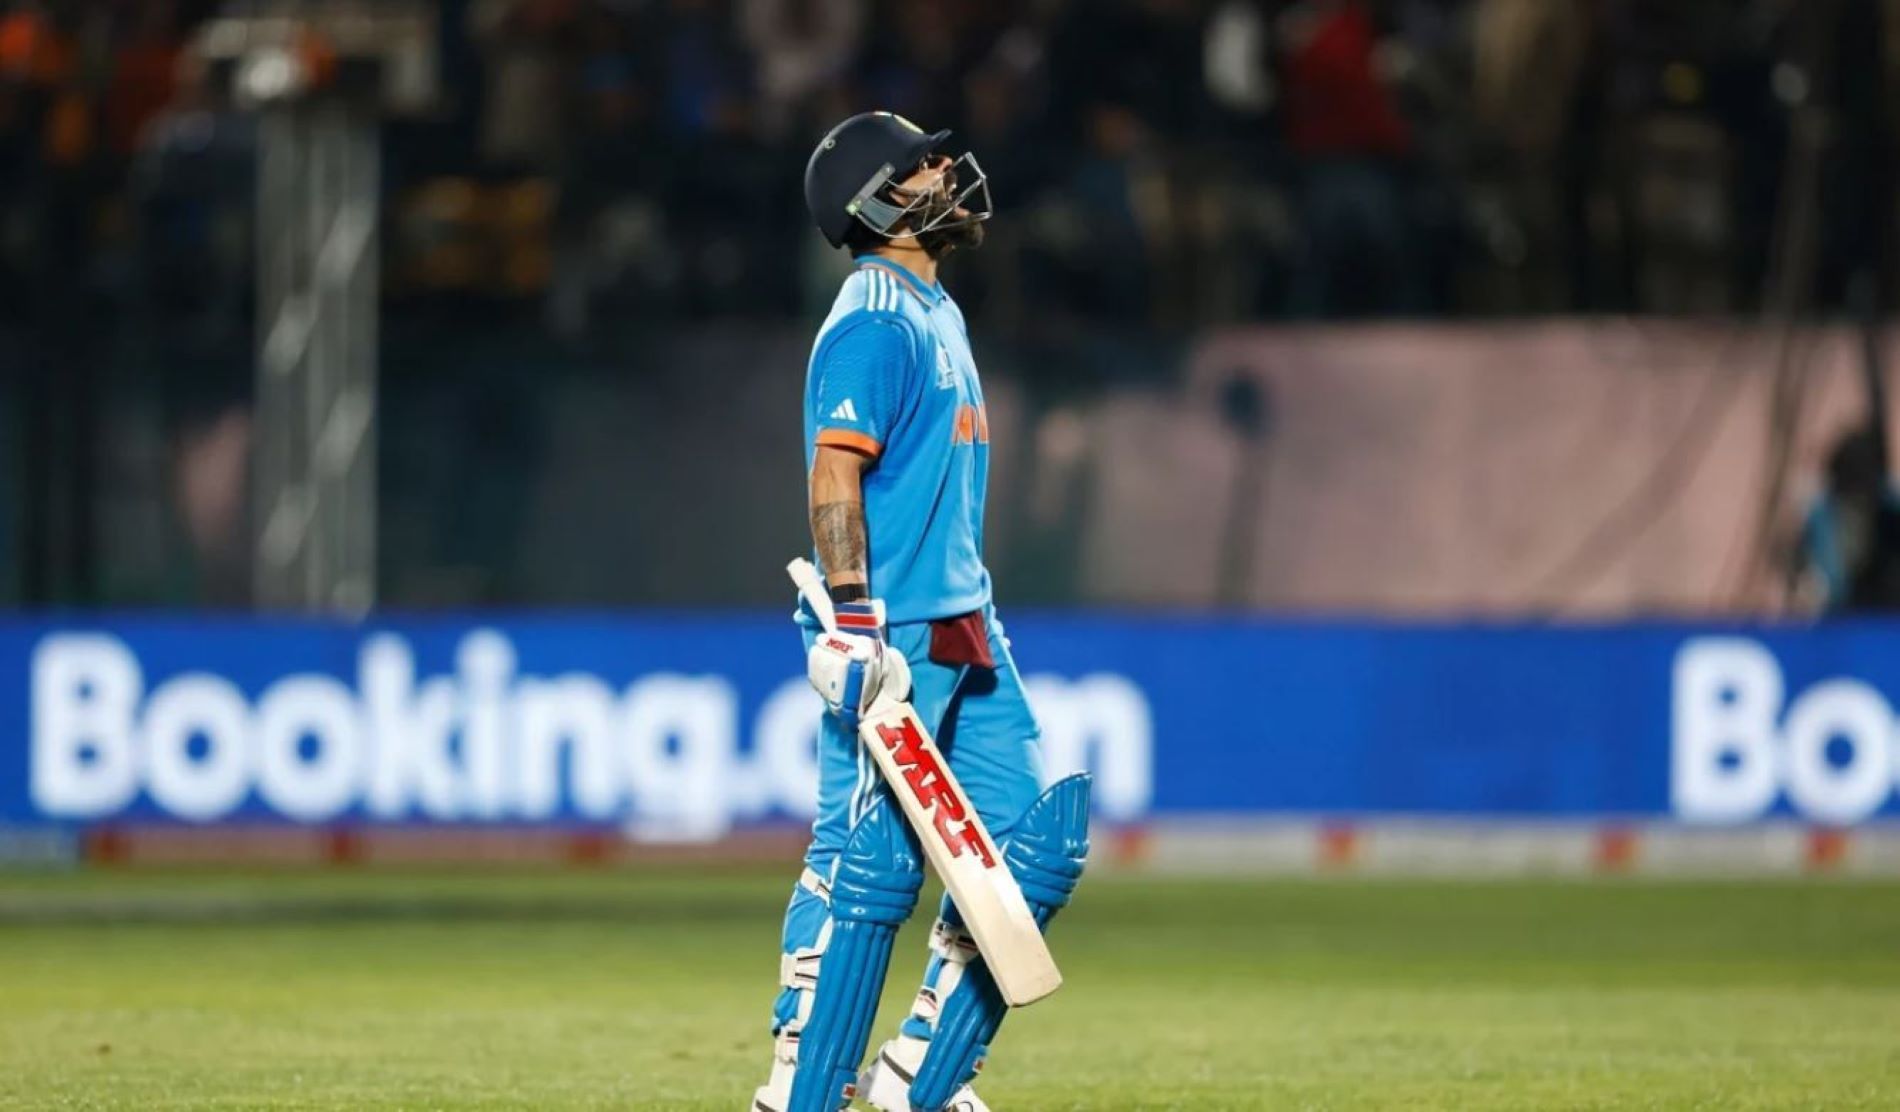 Kohli missed out on a second consecutive century